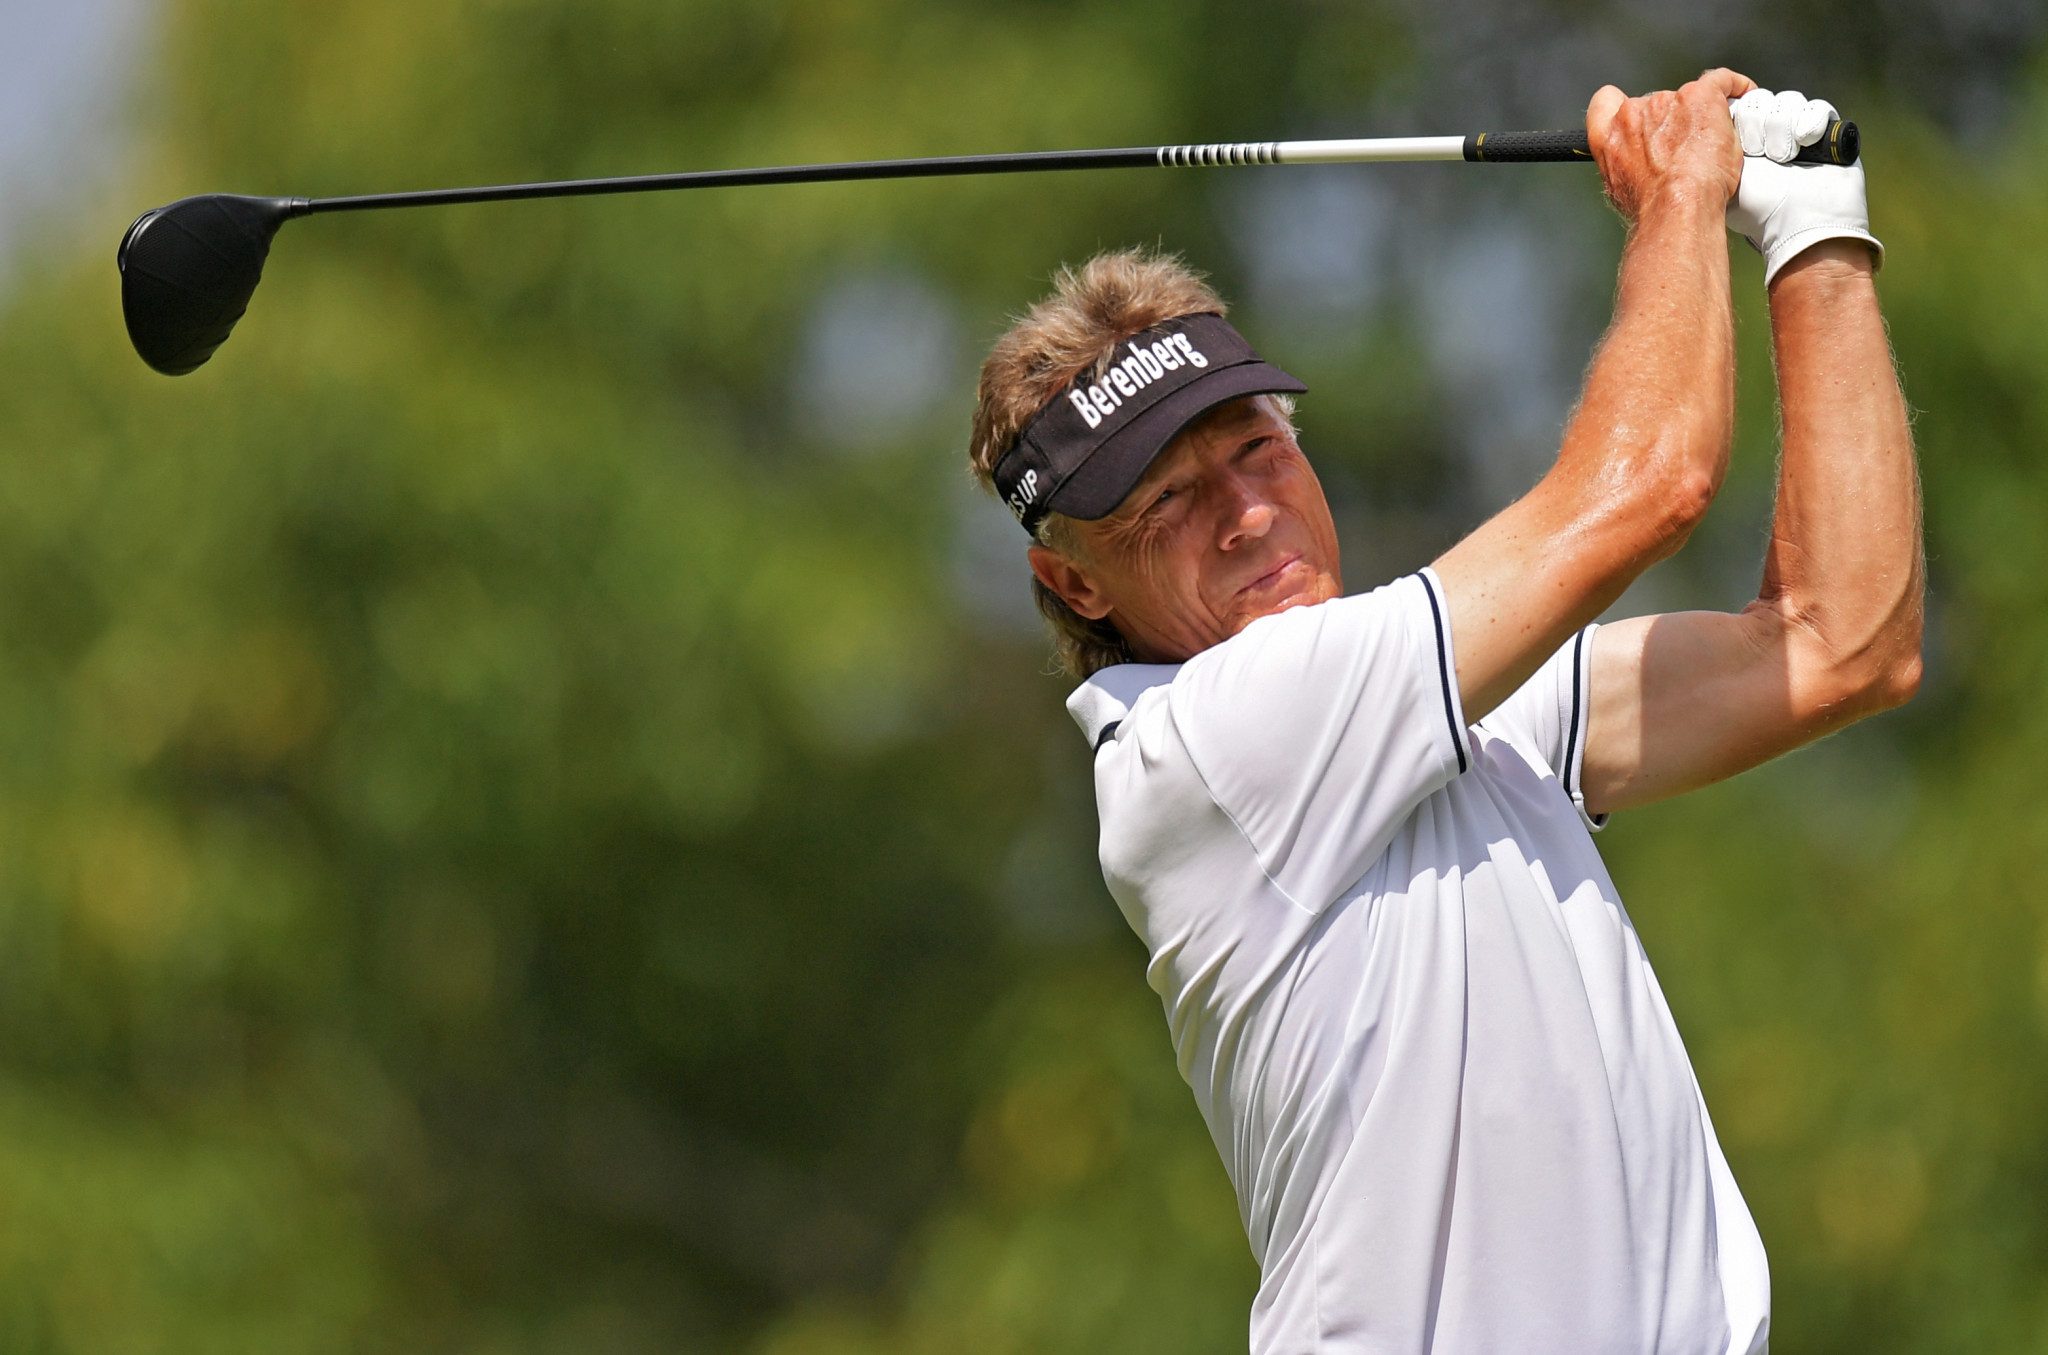 Bernhard Langer will not be defending his title due to family reasons ©Getty Images